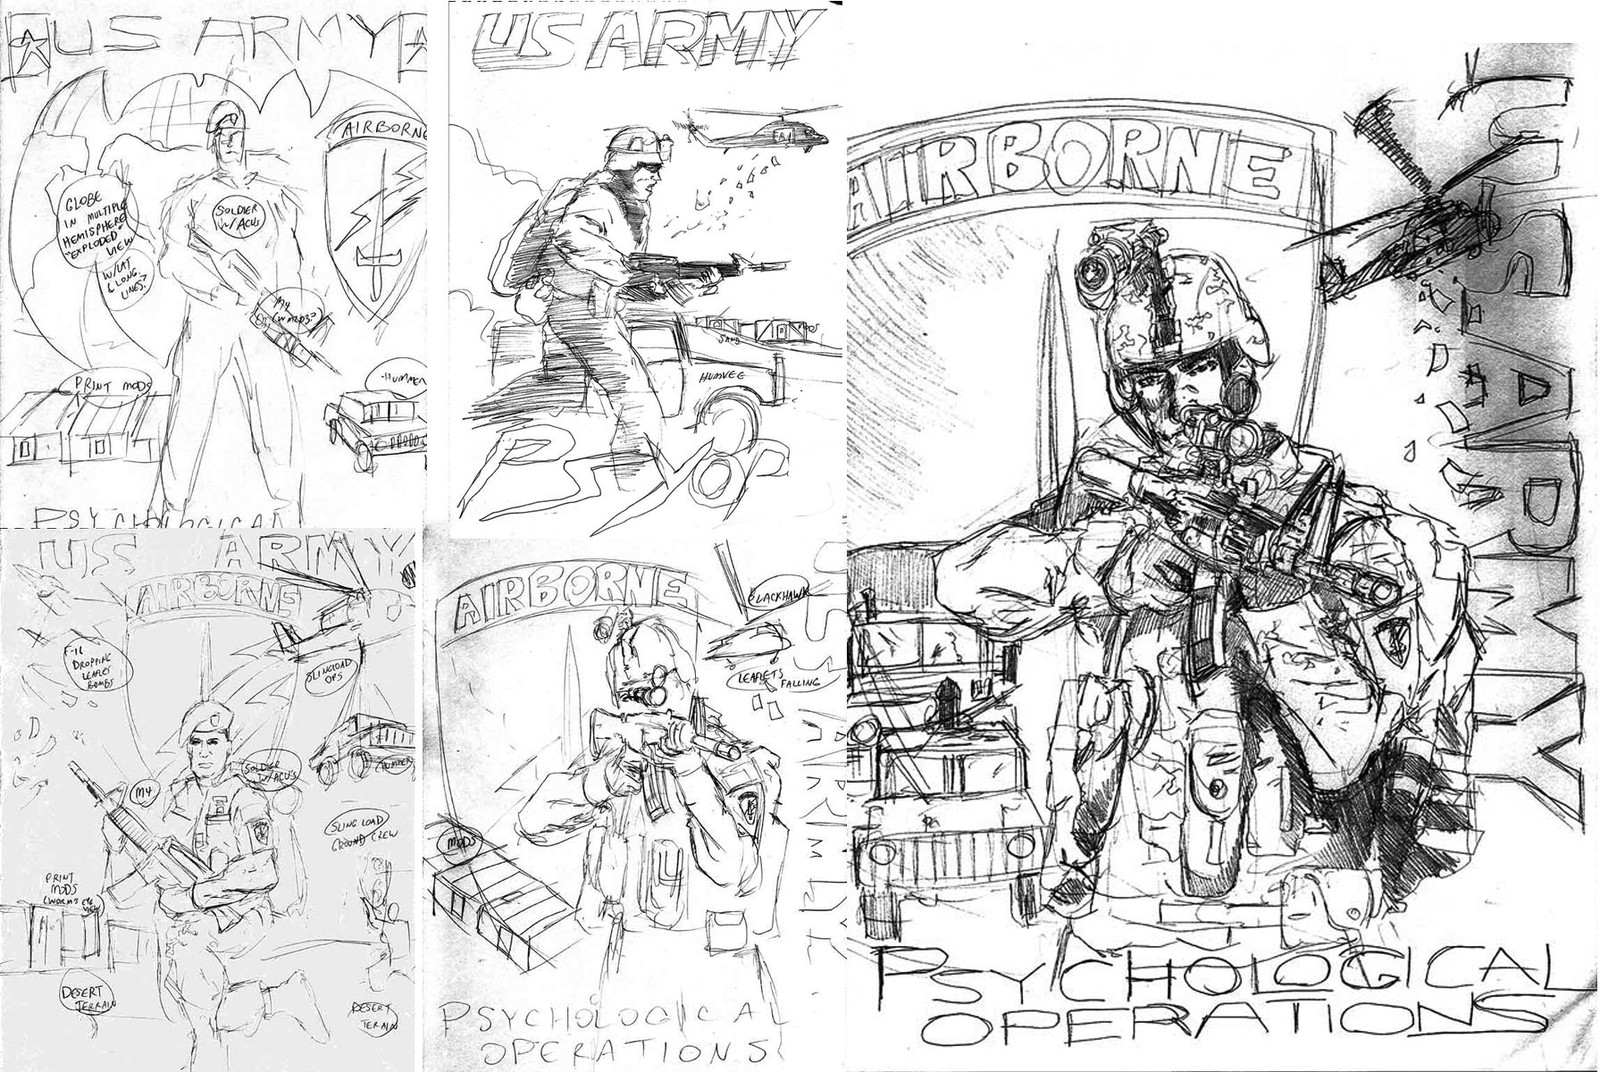 Thumbnail proposals of the subject matter requested by leadership, with a slightly tighter comp based on approval of the lower-right thumbnail.